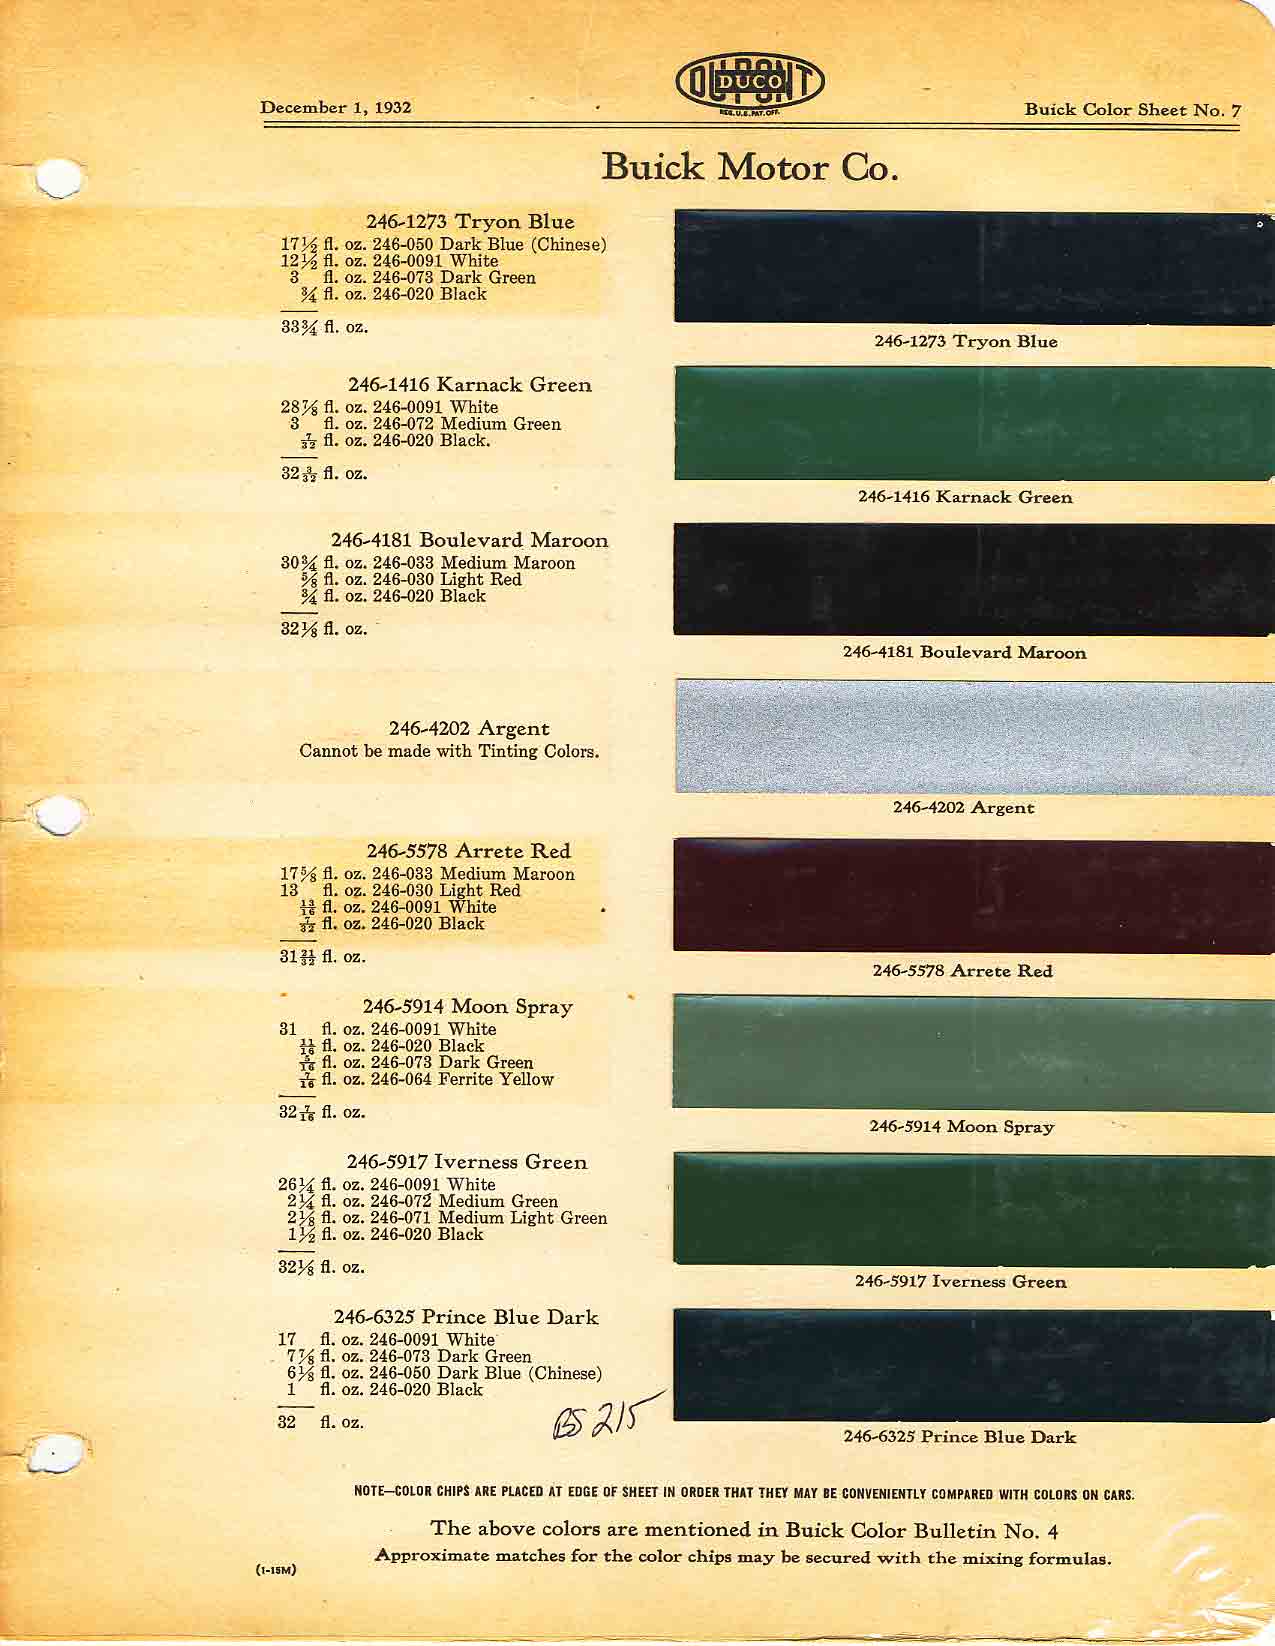 Colors and codes used on Buick Vehicles in 1932